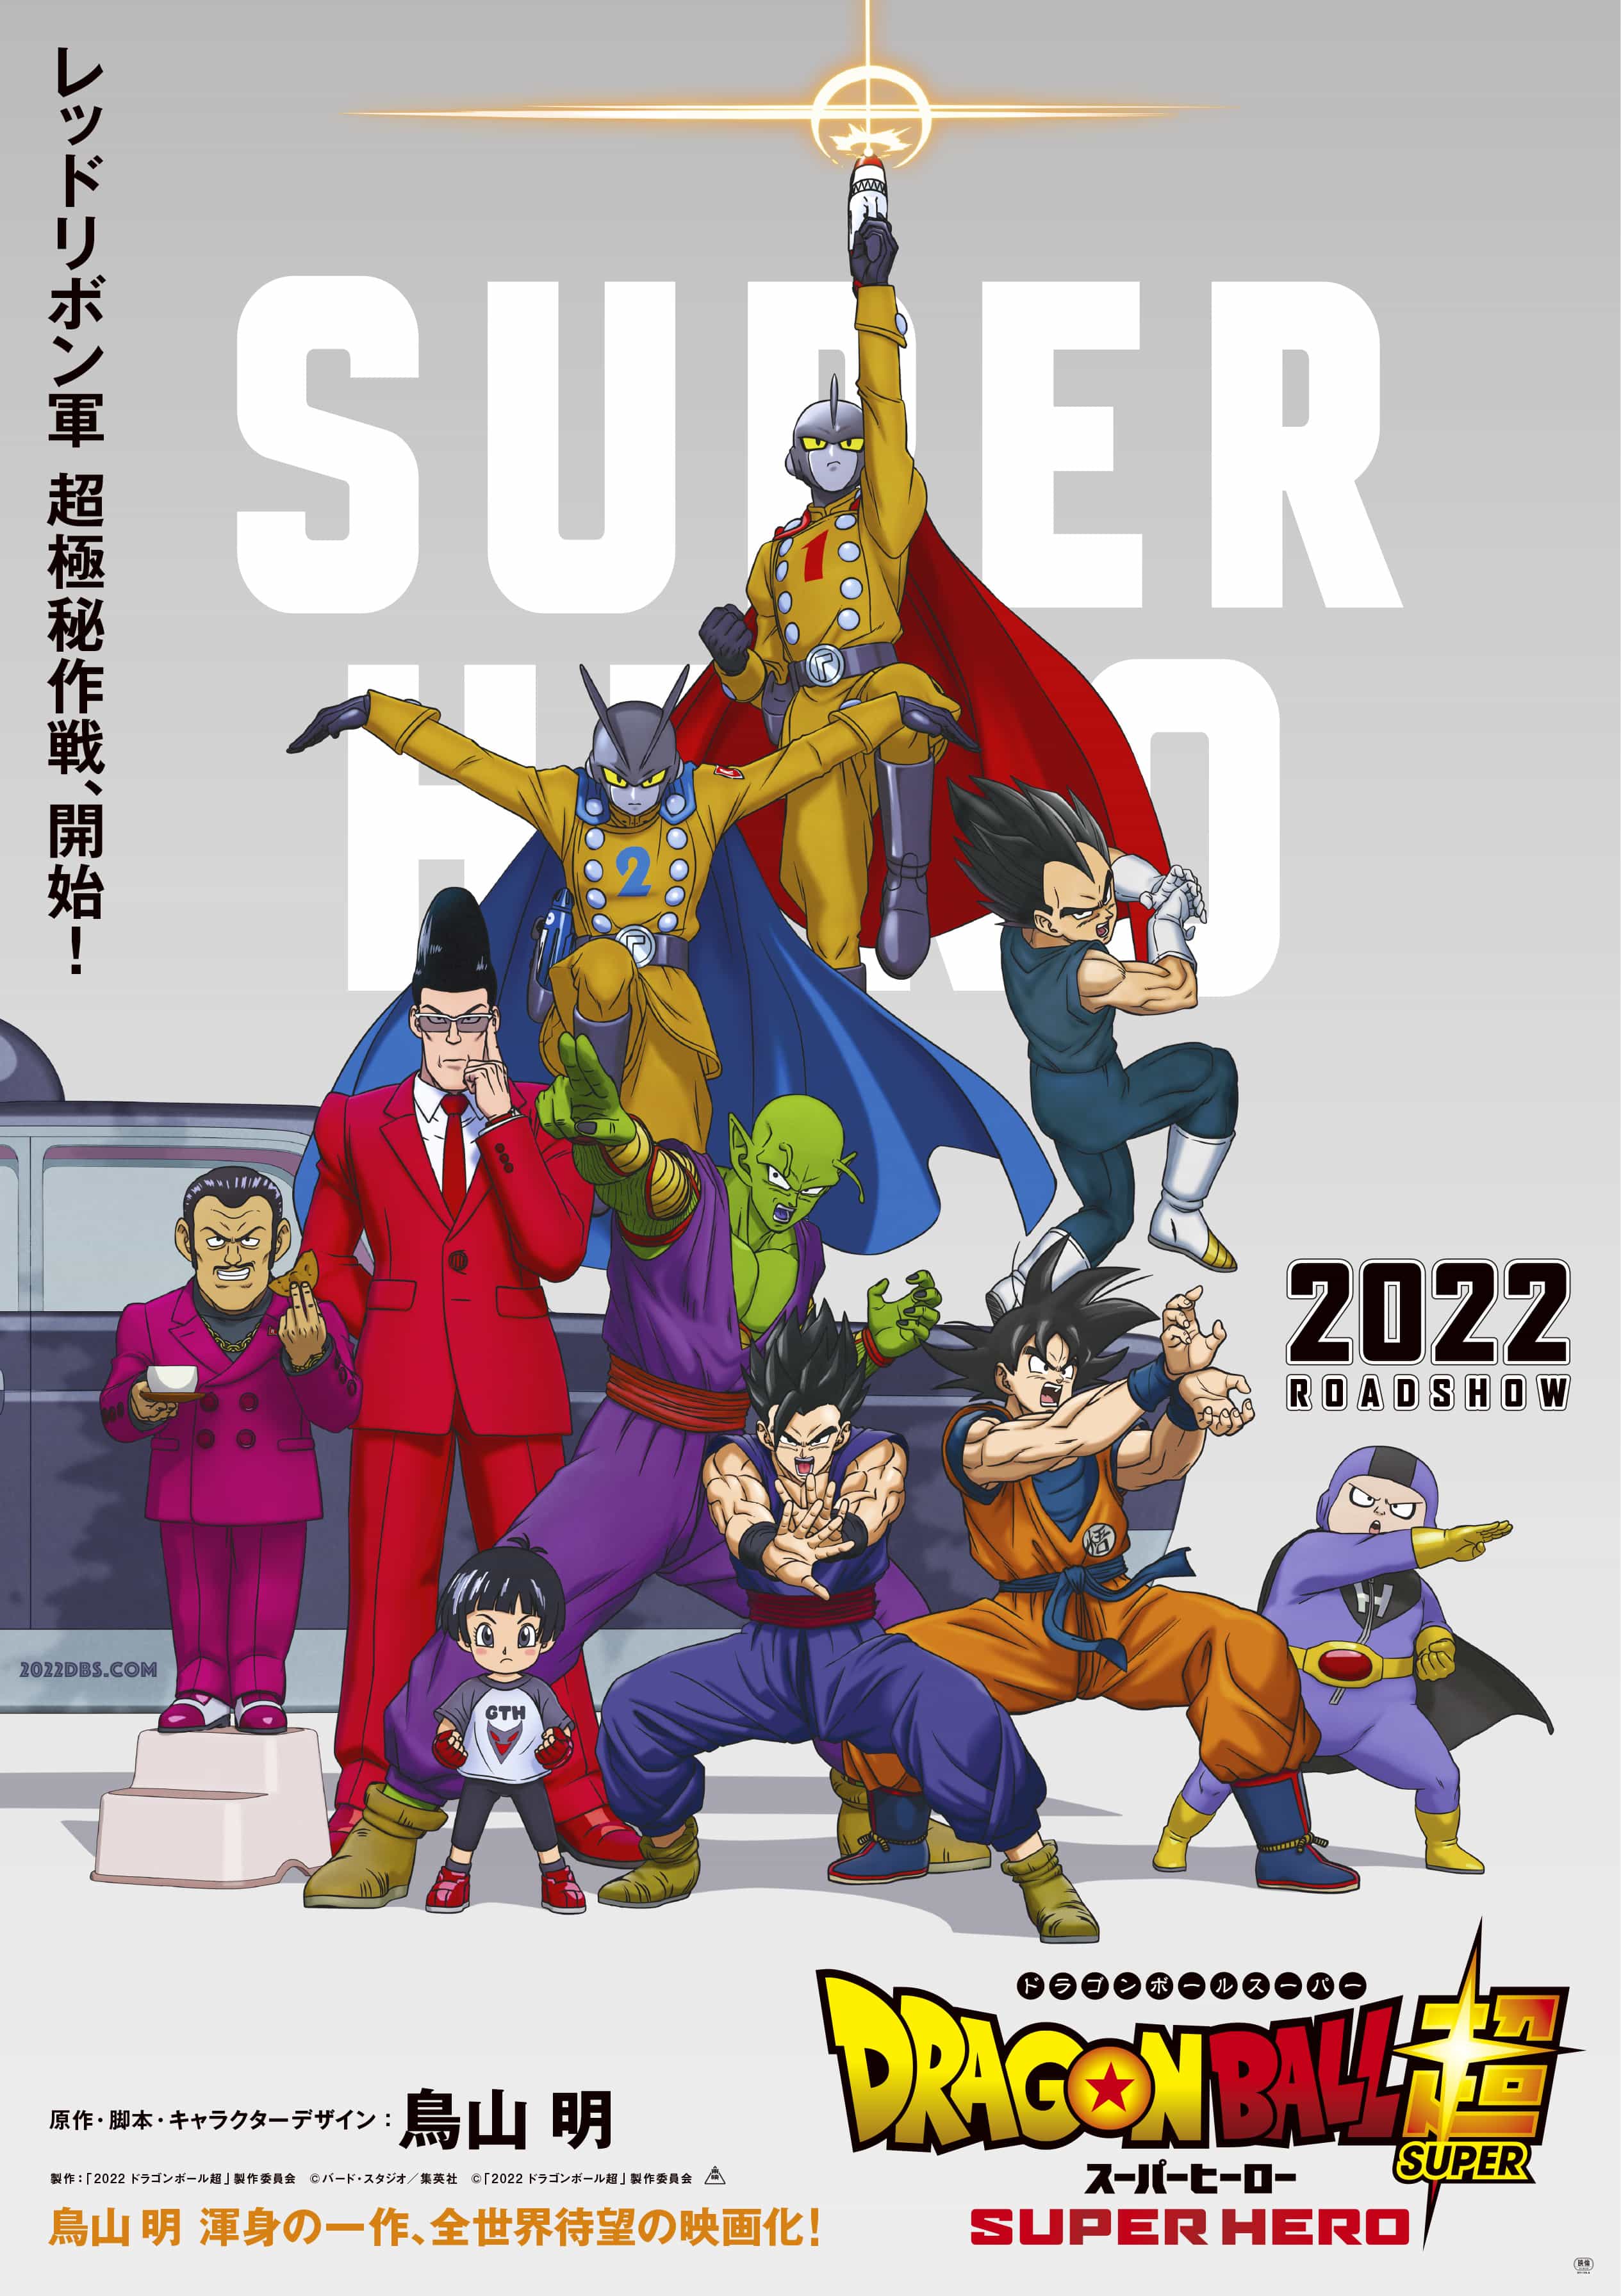 US Box Office Weekend Report 19th - 21st August 2022: Animated feature Dragon Ball Super: Super Hero tops the US box office with a debut gross of $20 Million